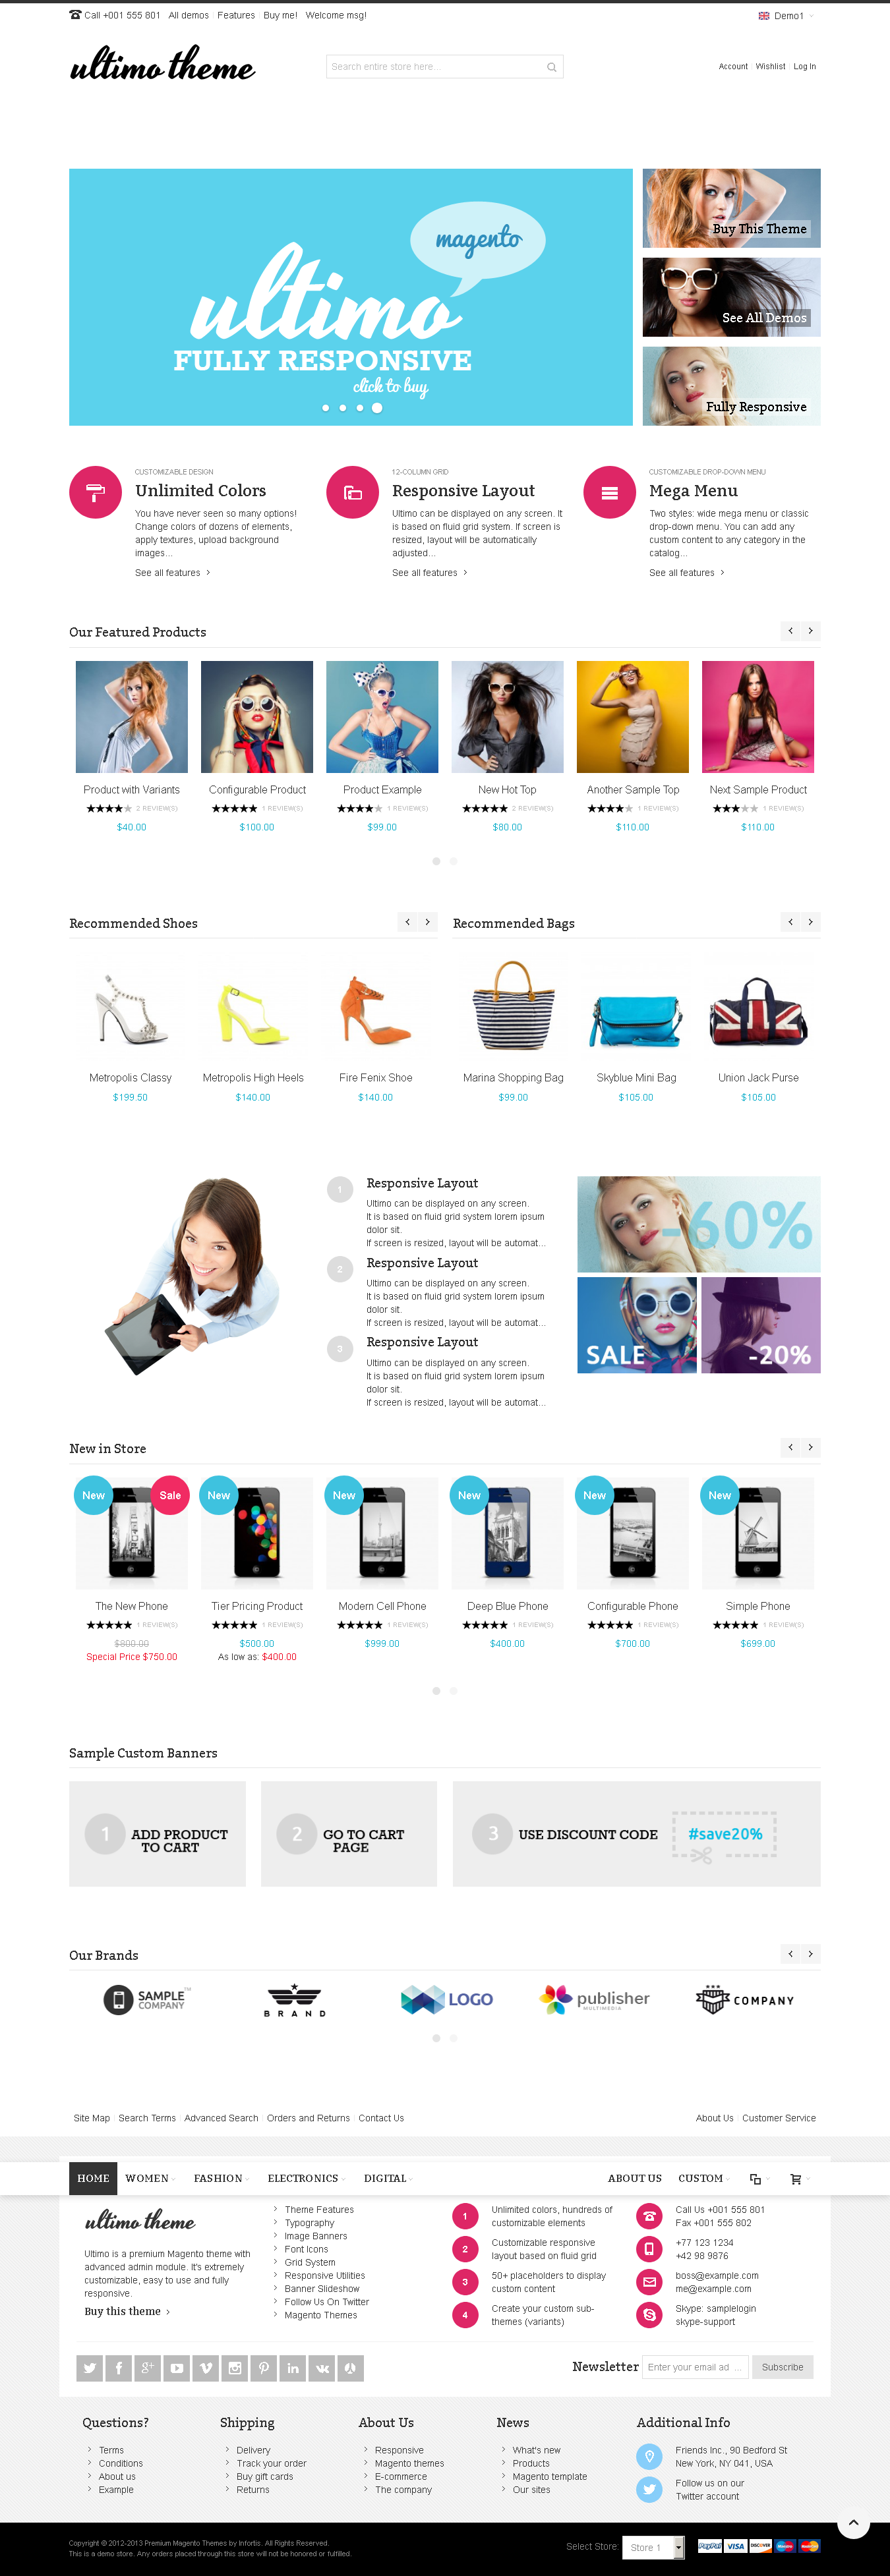 Top 5 Magento Themes for Large Inventory Stores - Ultimo - Fluid Responsive Magento Theme